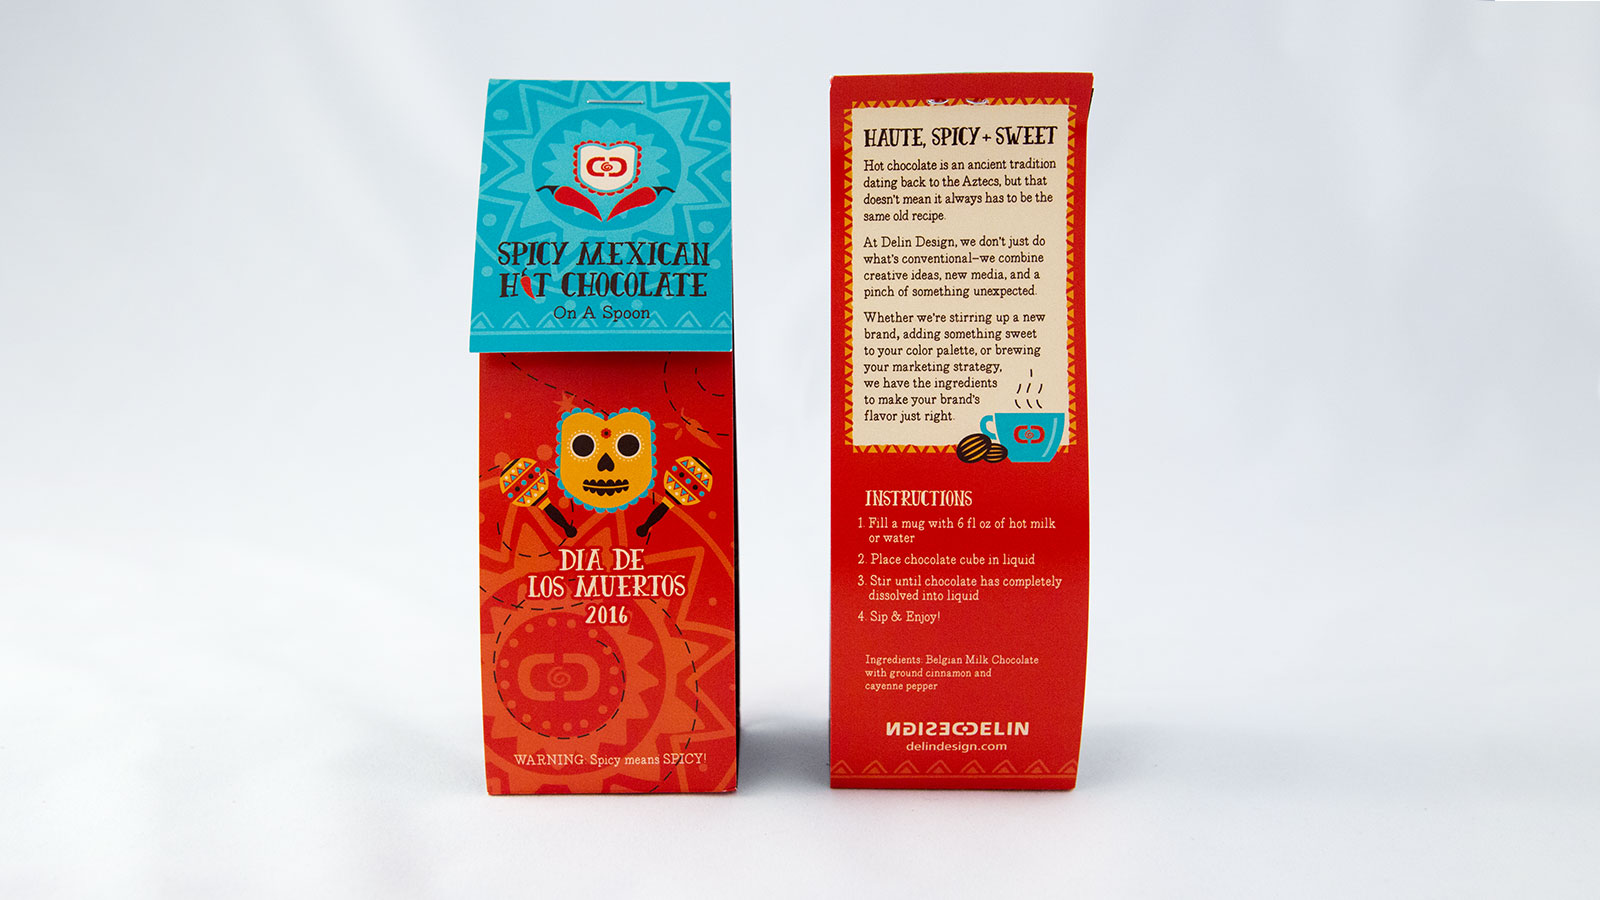 Spicy Mexican Hot Chocolate Promotion – Internal Packaging